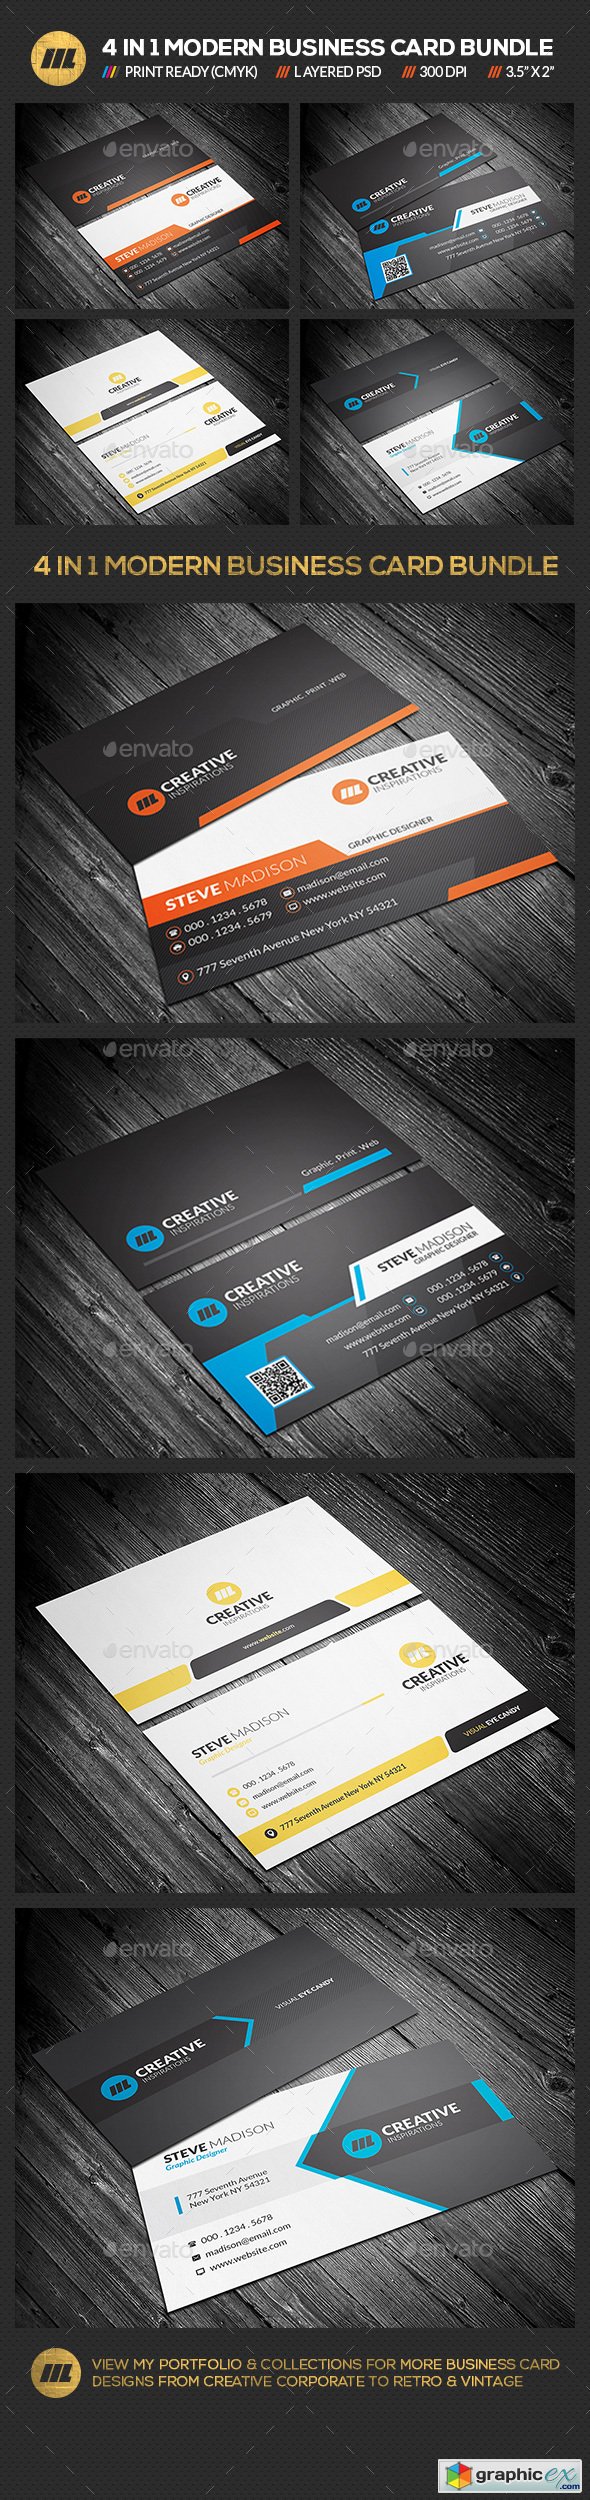 4 in 1 Business Card Bundle 01